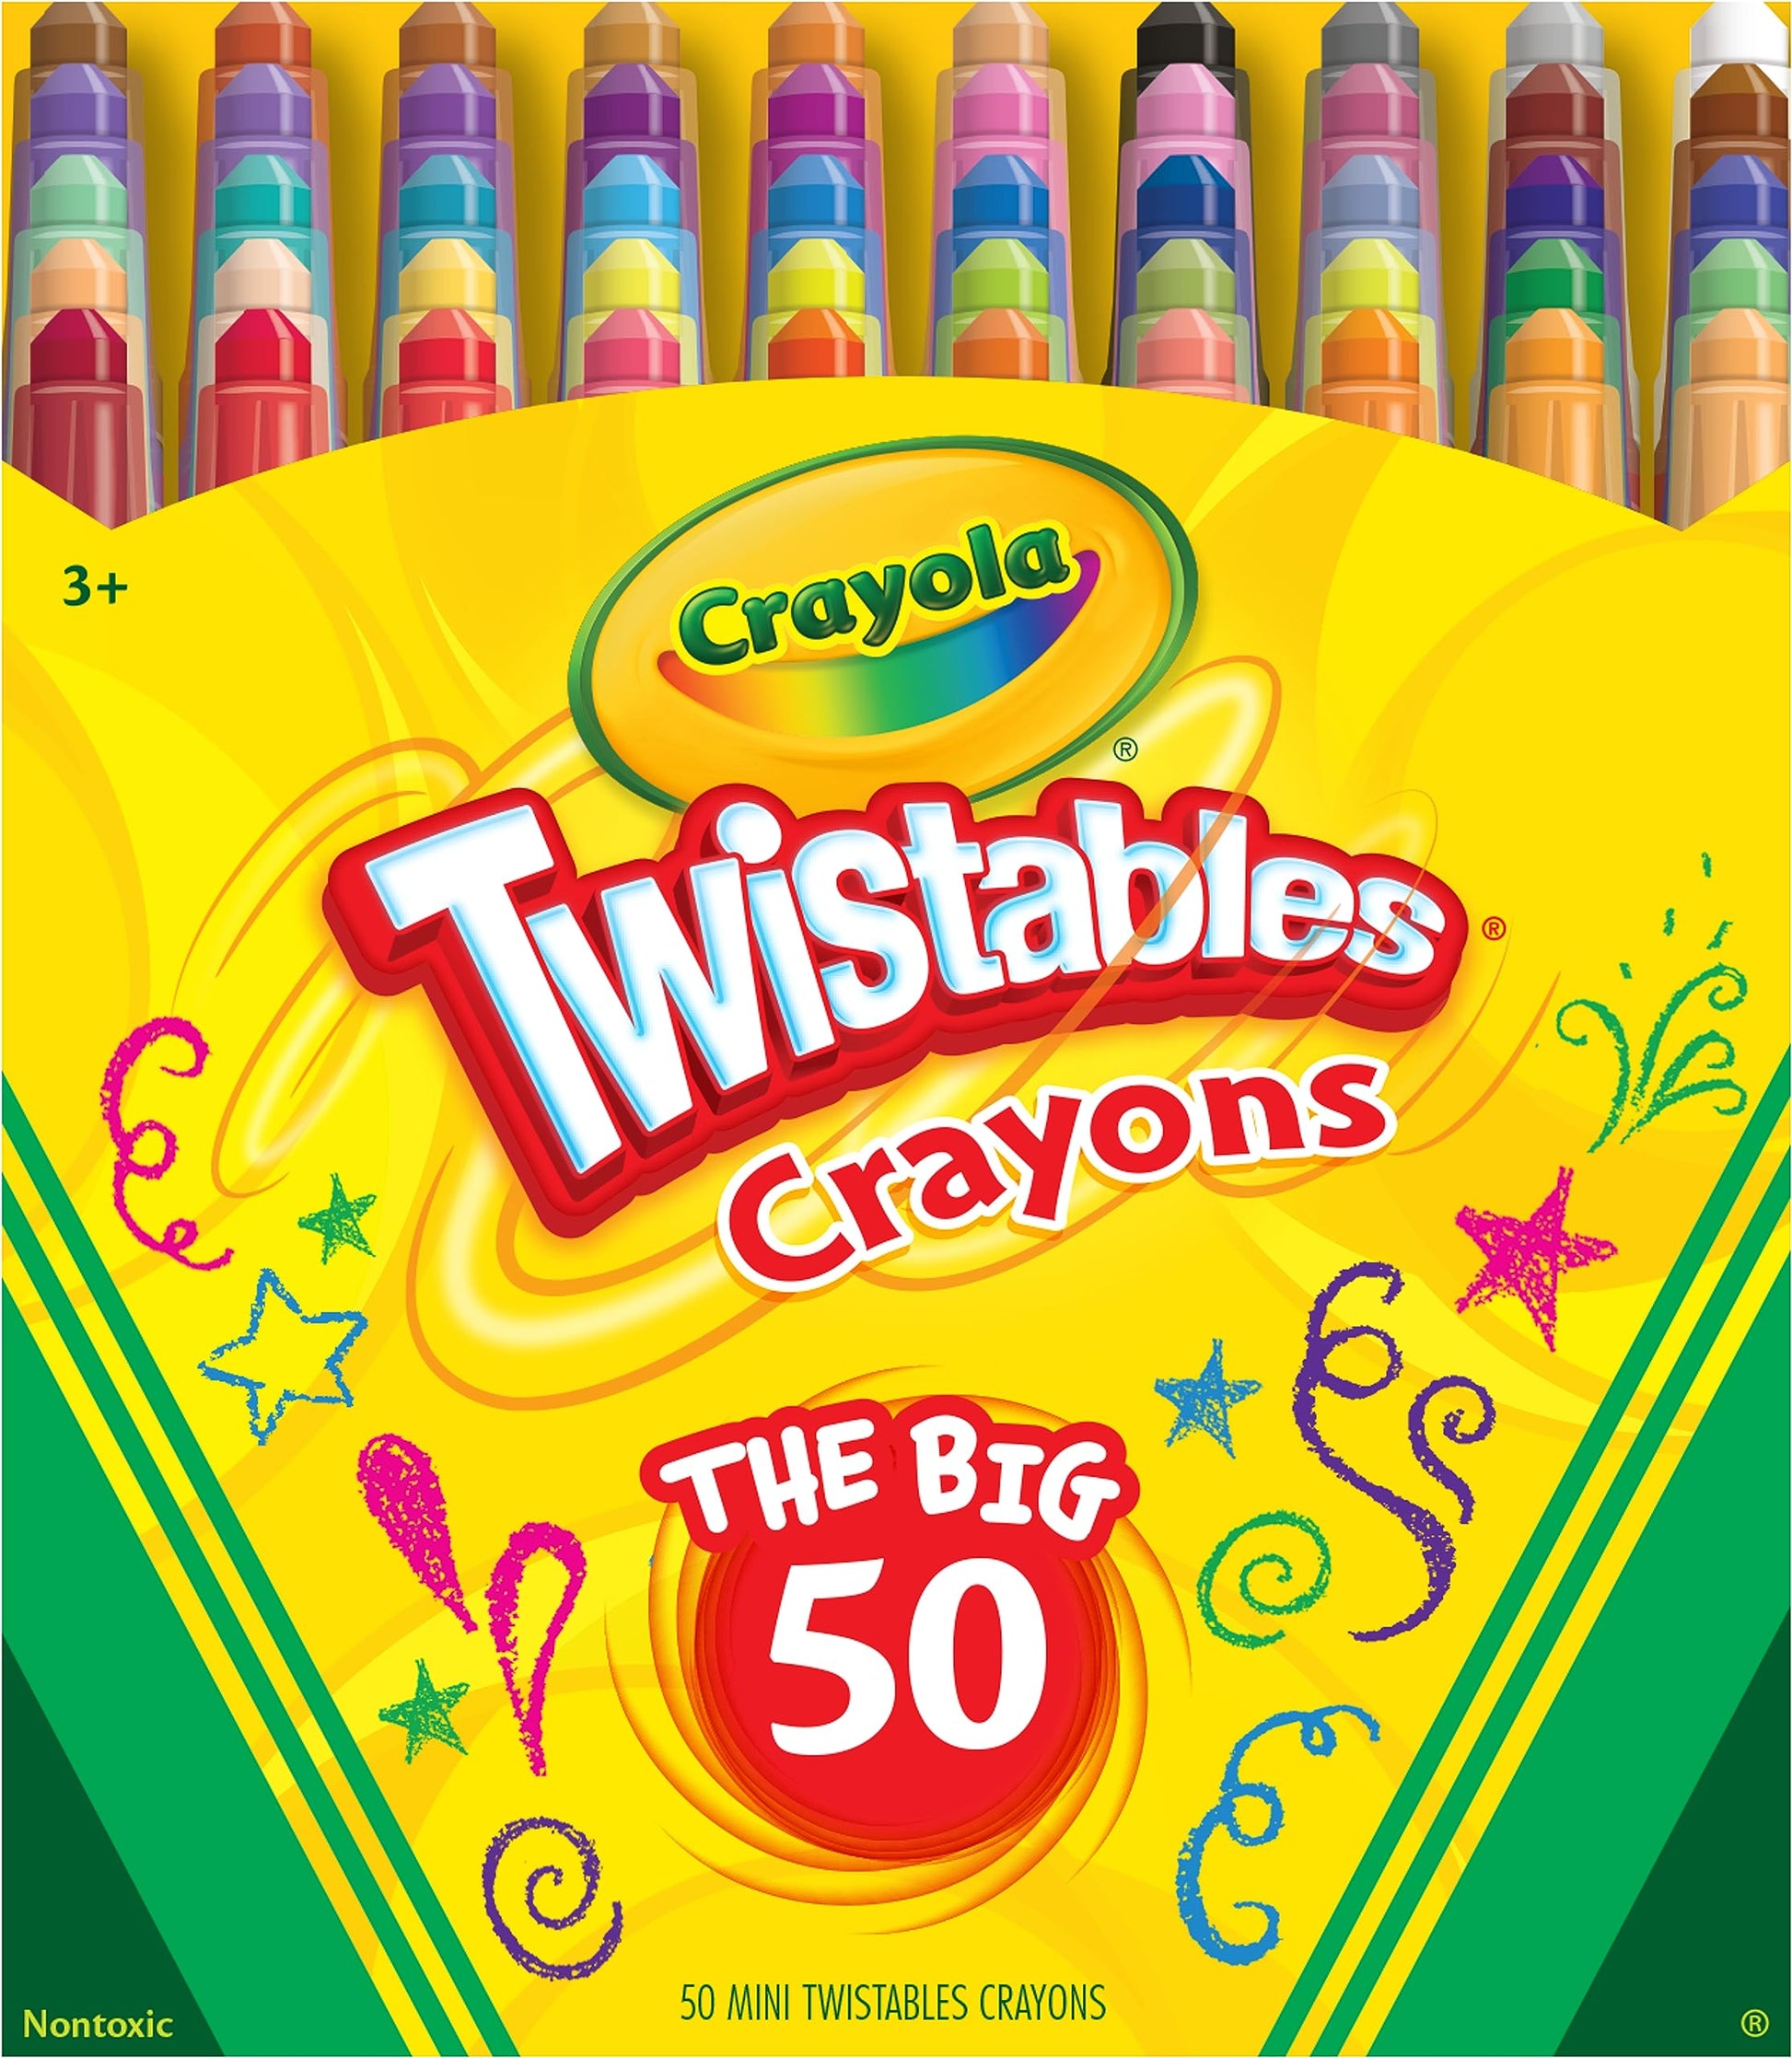 Crayola Silly Scents Twistables Crayons, 12 Count